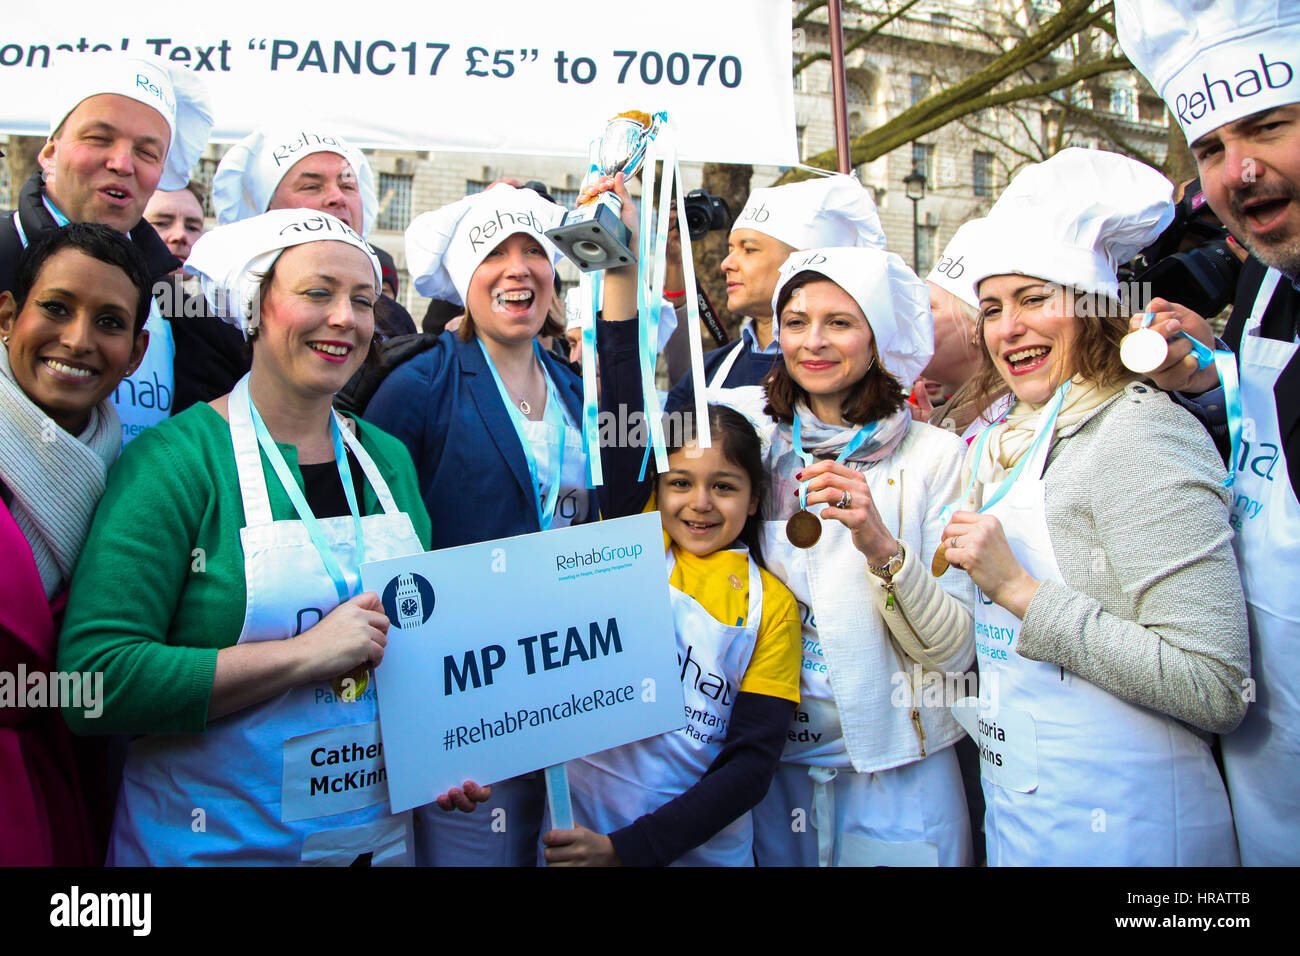 Victoria Tower Gardens, London, UK. 28th Feb, 2017. The winning team - MPs won the race. Lords, MPs and members of media teams take part in pancake race - celebrating 20 years of flipping for Rehab charity and its work with disabled people. Credit: Dinendra Haria/Alamy Live News Stock Photo